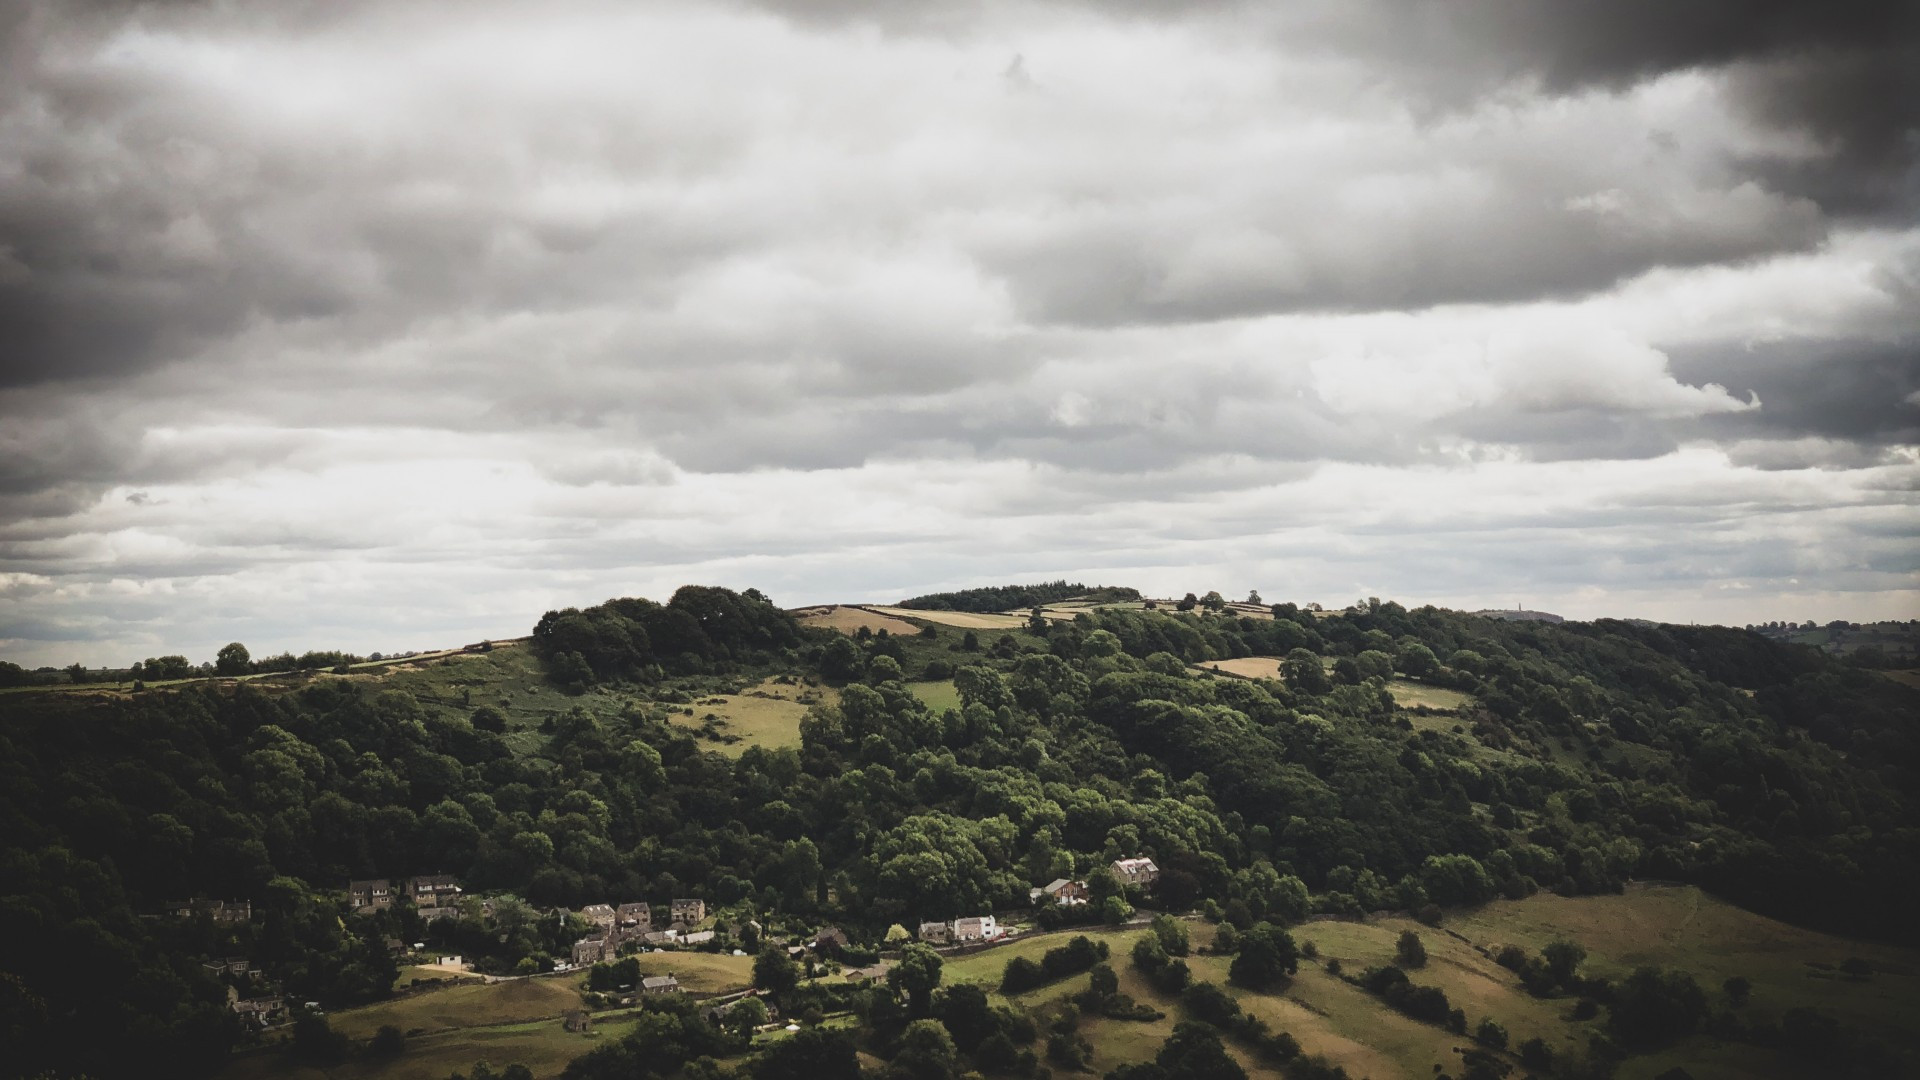 Download 1920x1080 Dark Weather, Hill, Trees, Houses, Scenic, Cloudy Wallpaper for Widescreen